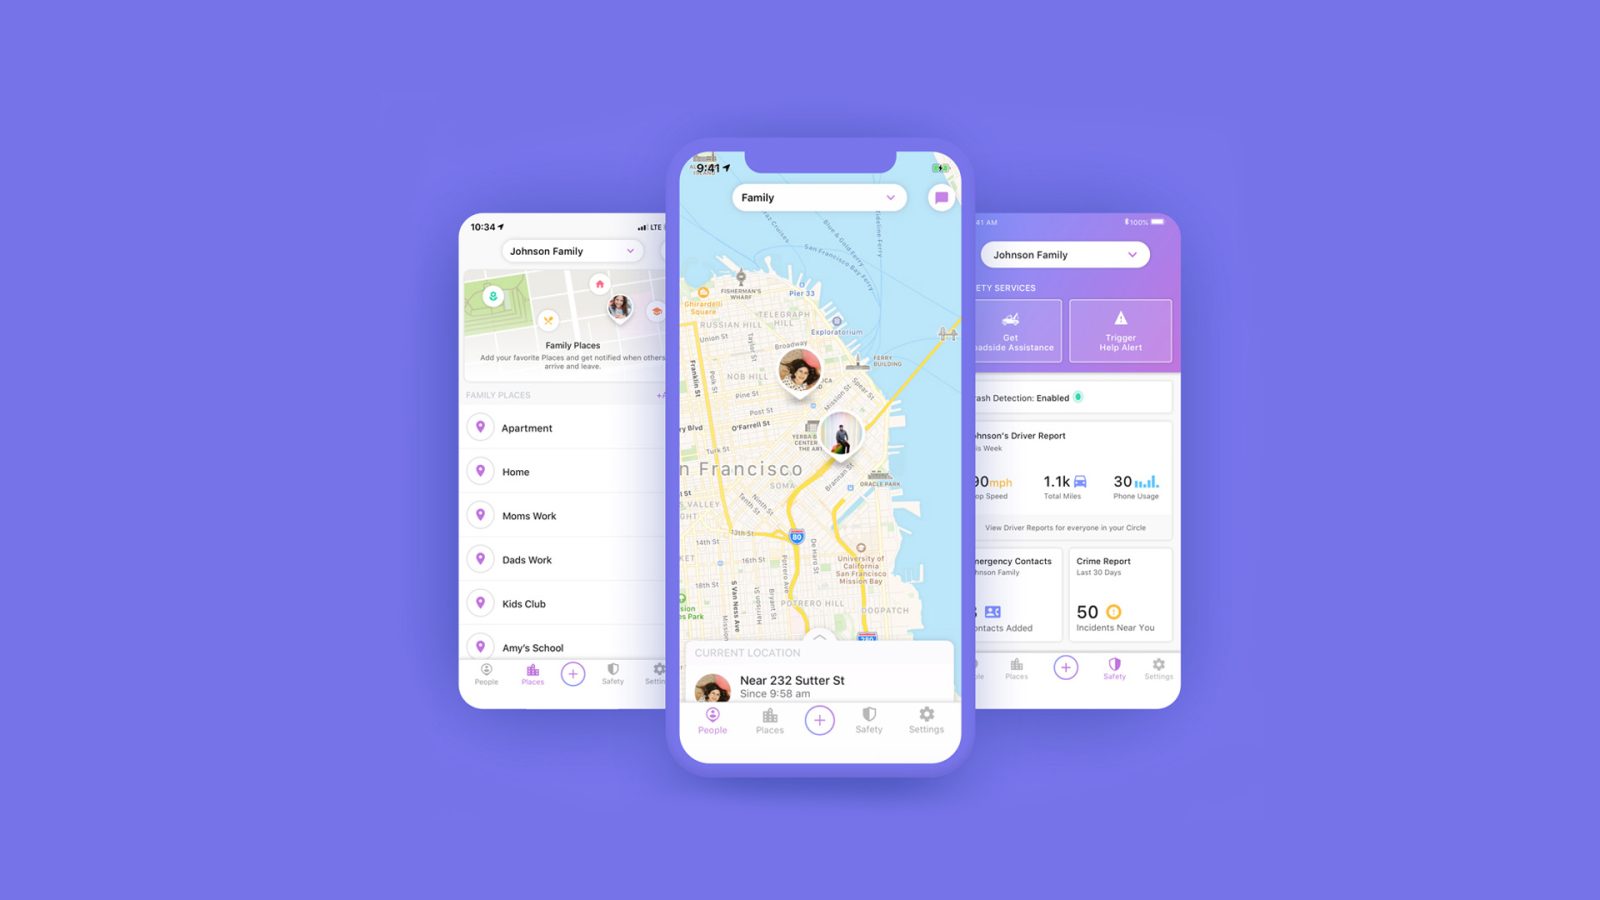 photo of Tile owner ‘Life360’ reportedly sells location data of its users to ‘virtually anyone’ image